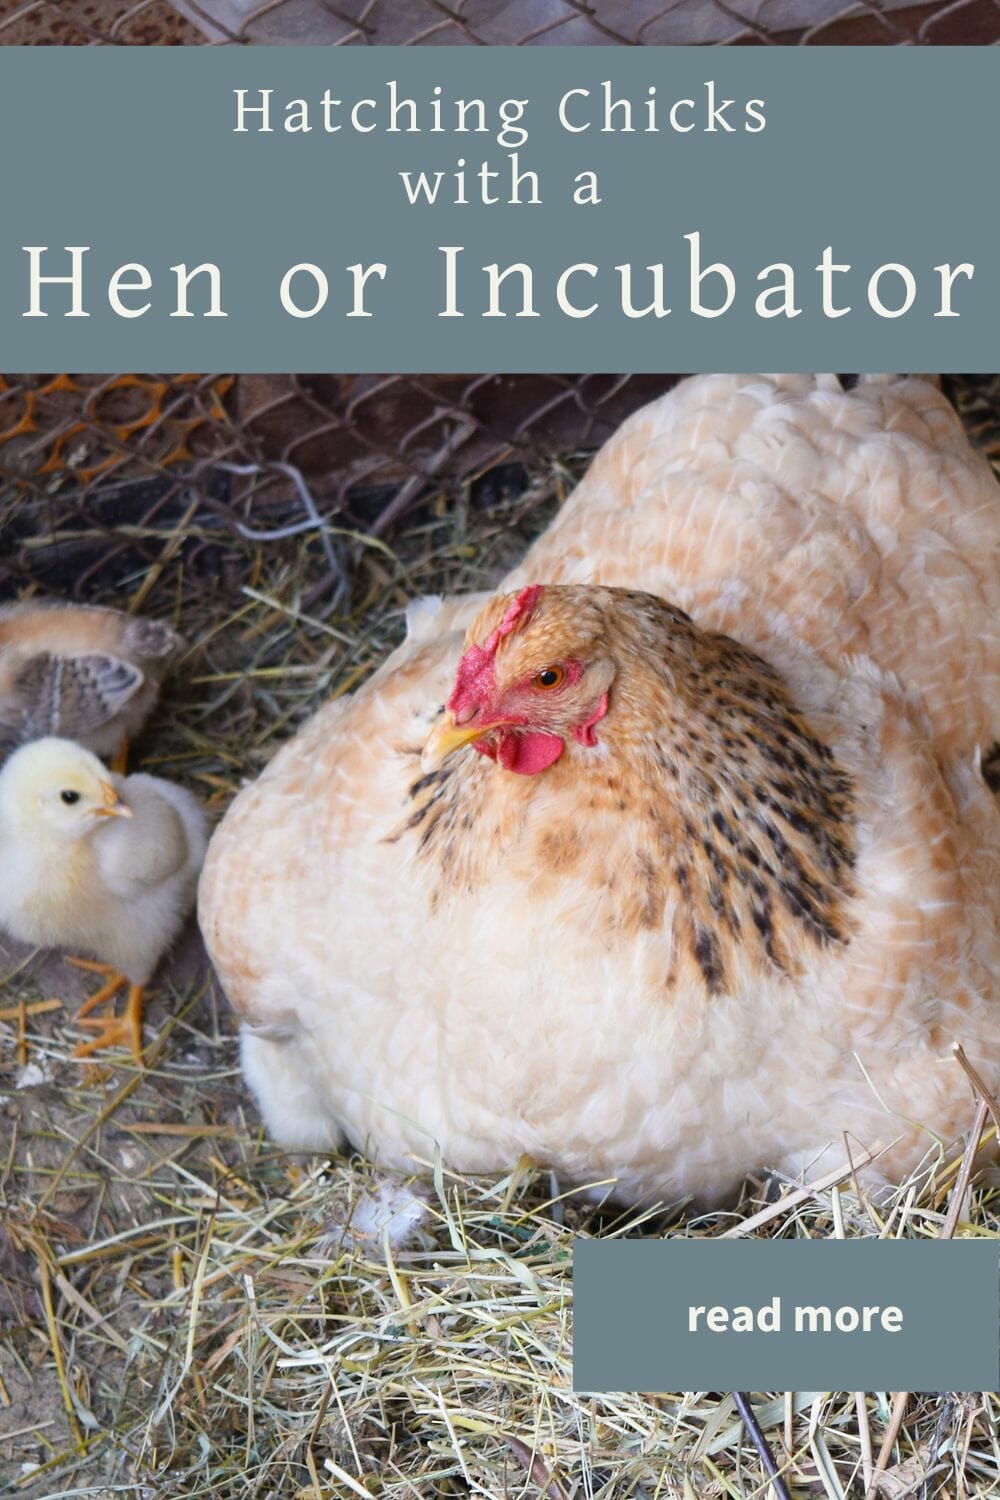 A pinterest-friendly graphic for weighing the pros and cons of hatching chicks with a broody hen versus an incubator.